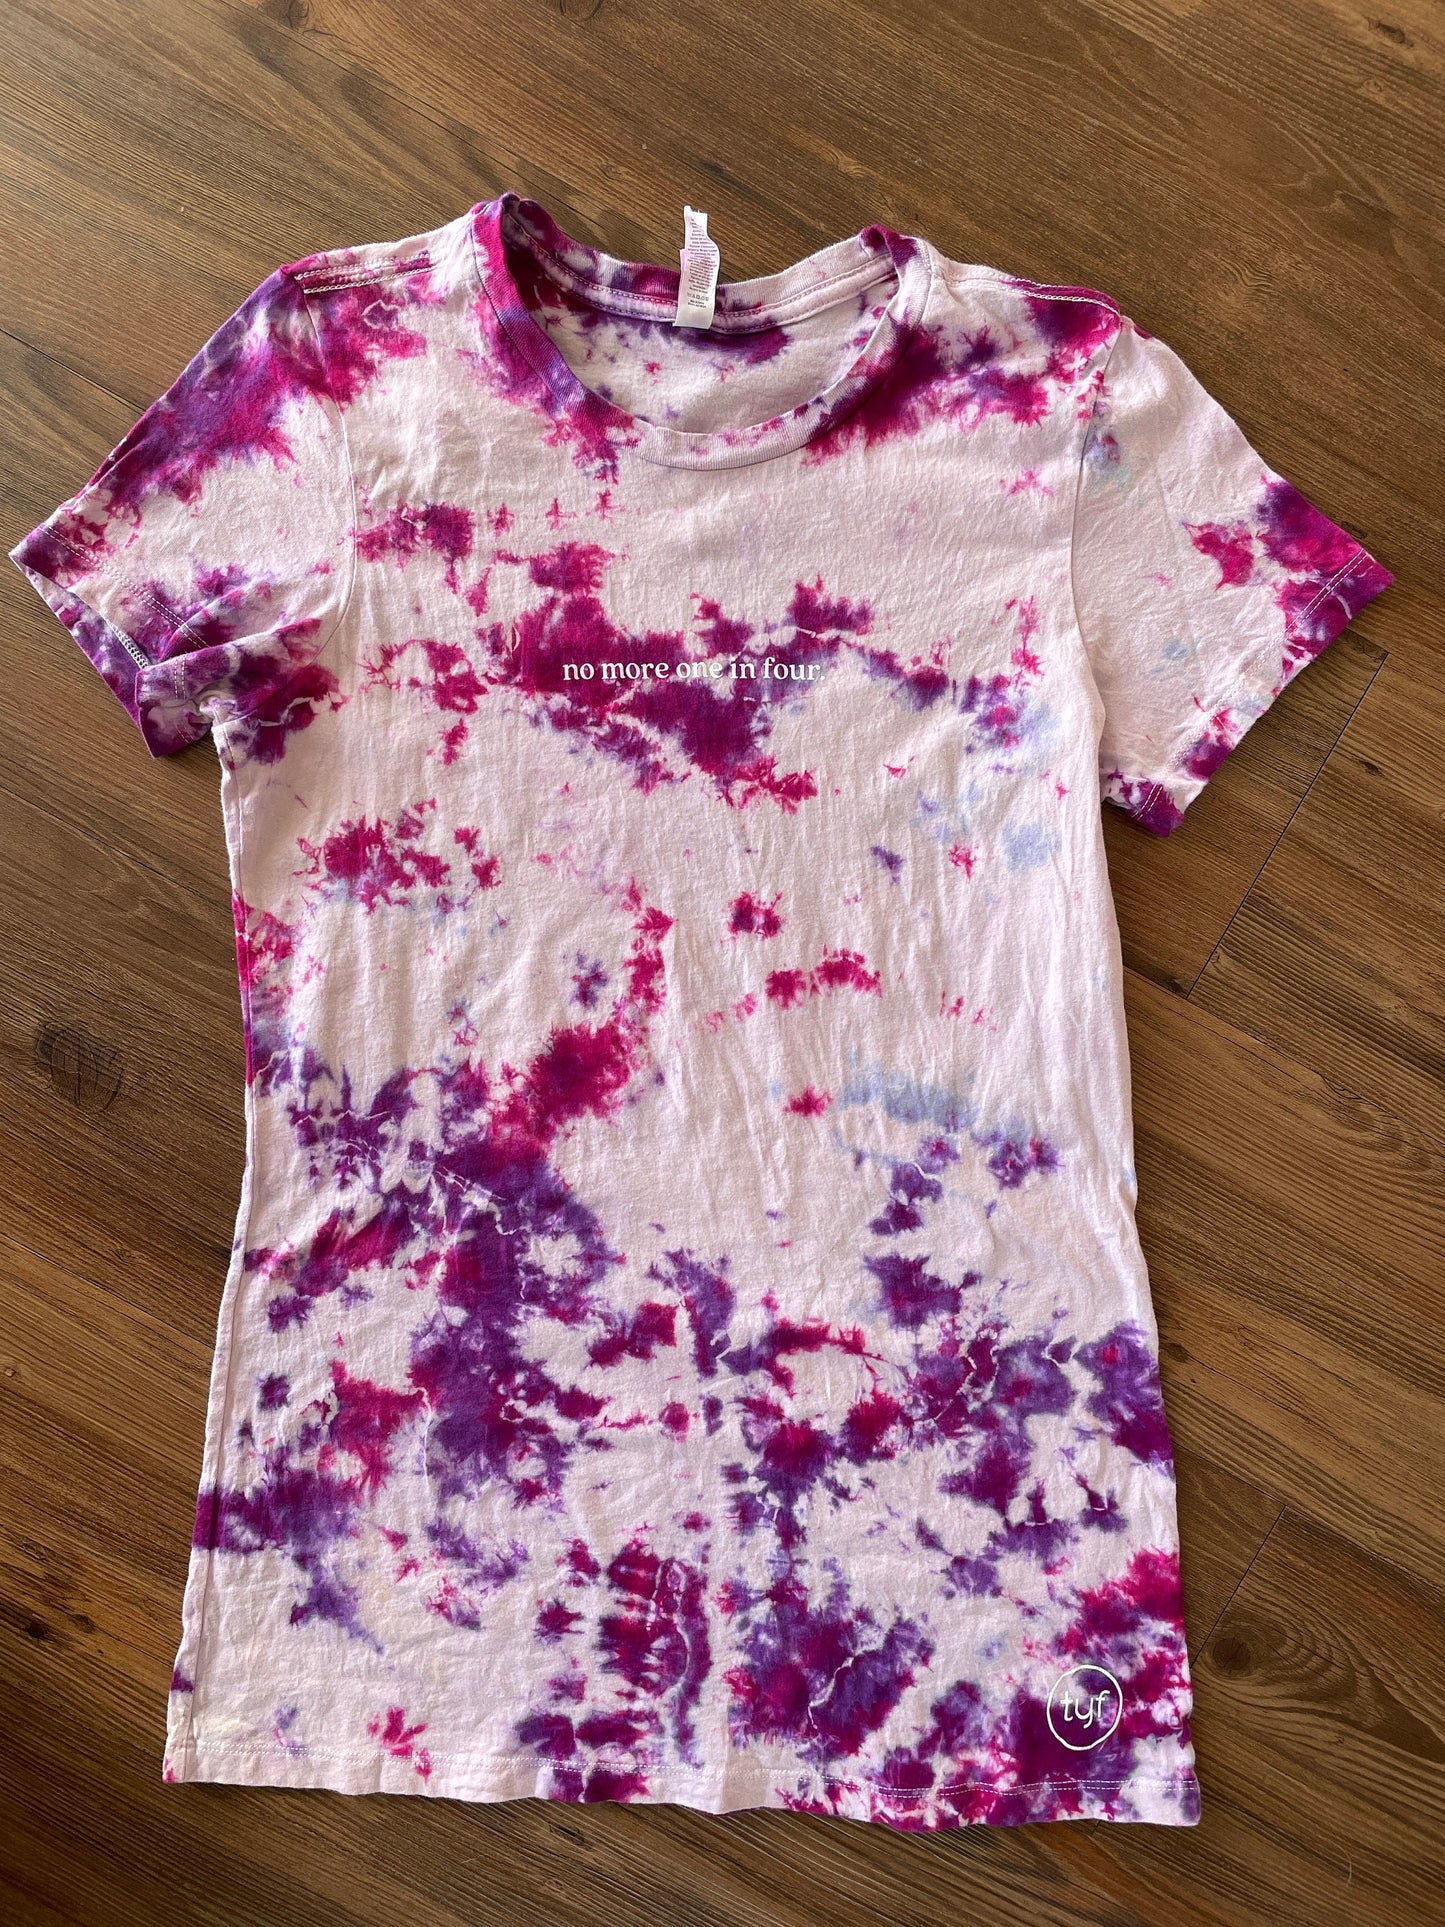 No More 1 in 4 Handmade Tie Dye t-shirt | Sexual Abuse Awareness Short Sleeve Top Women’s Medium | Sustainably Made